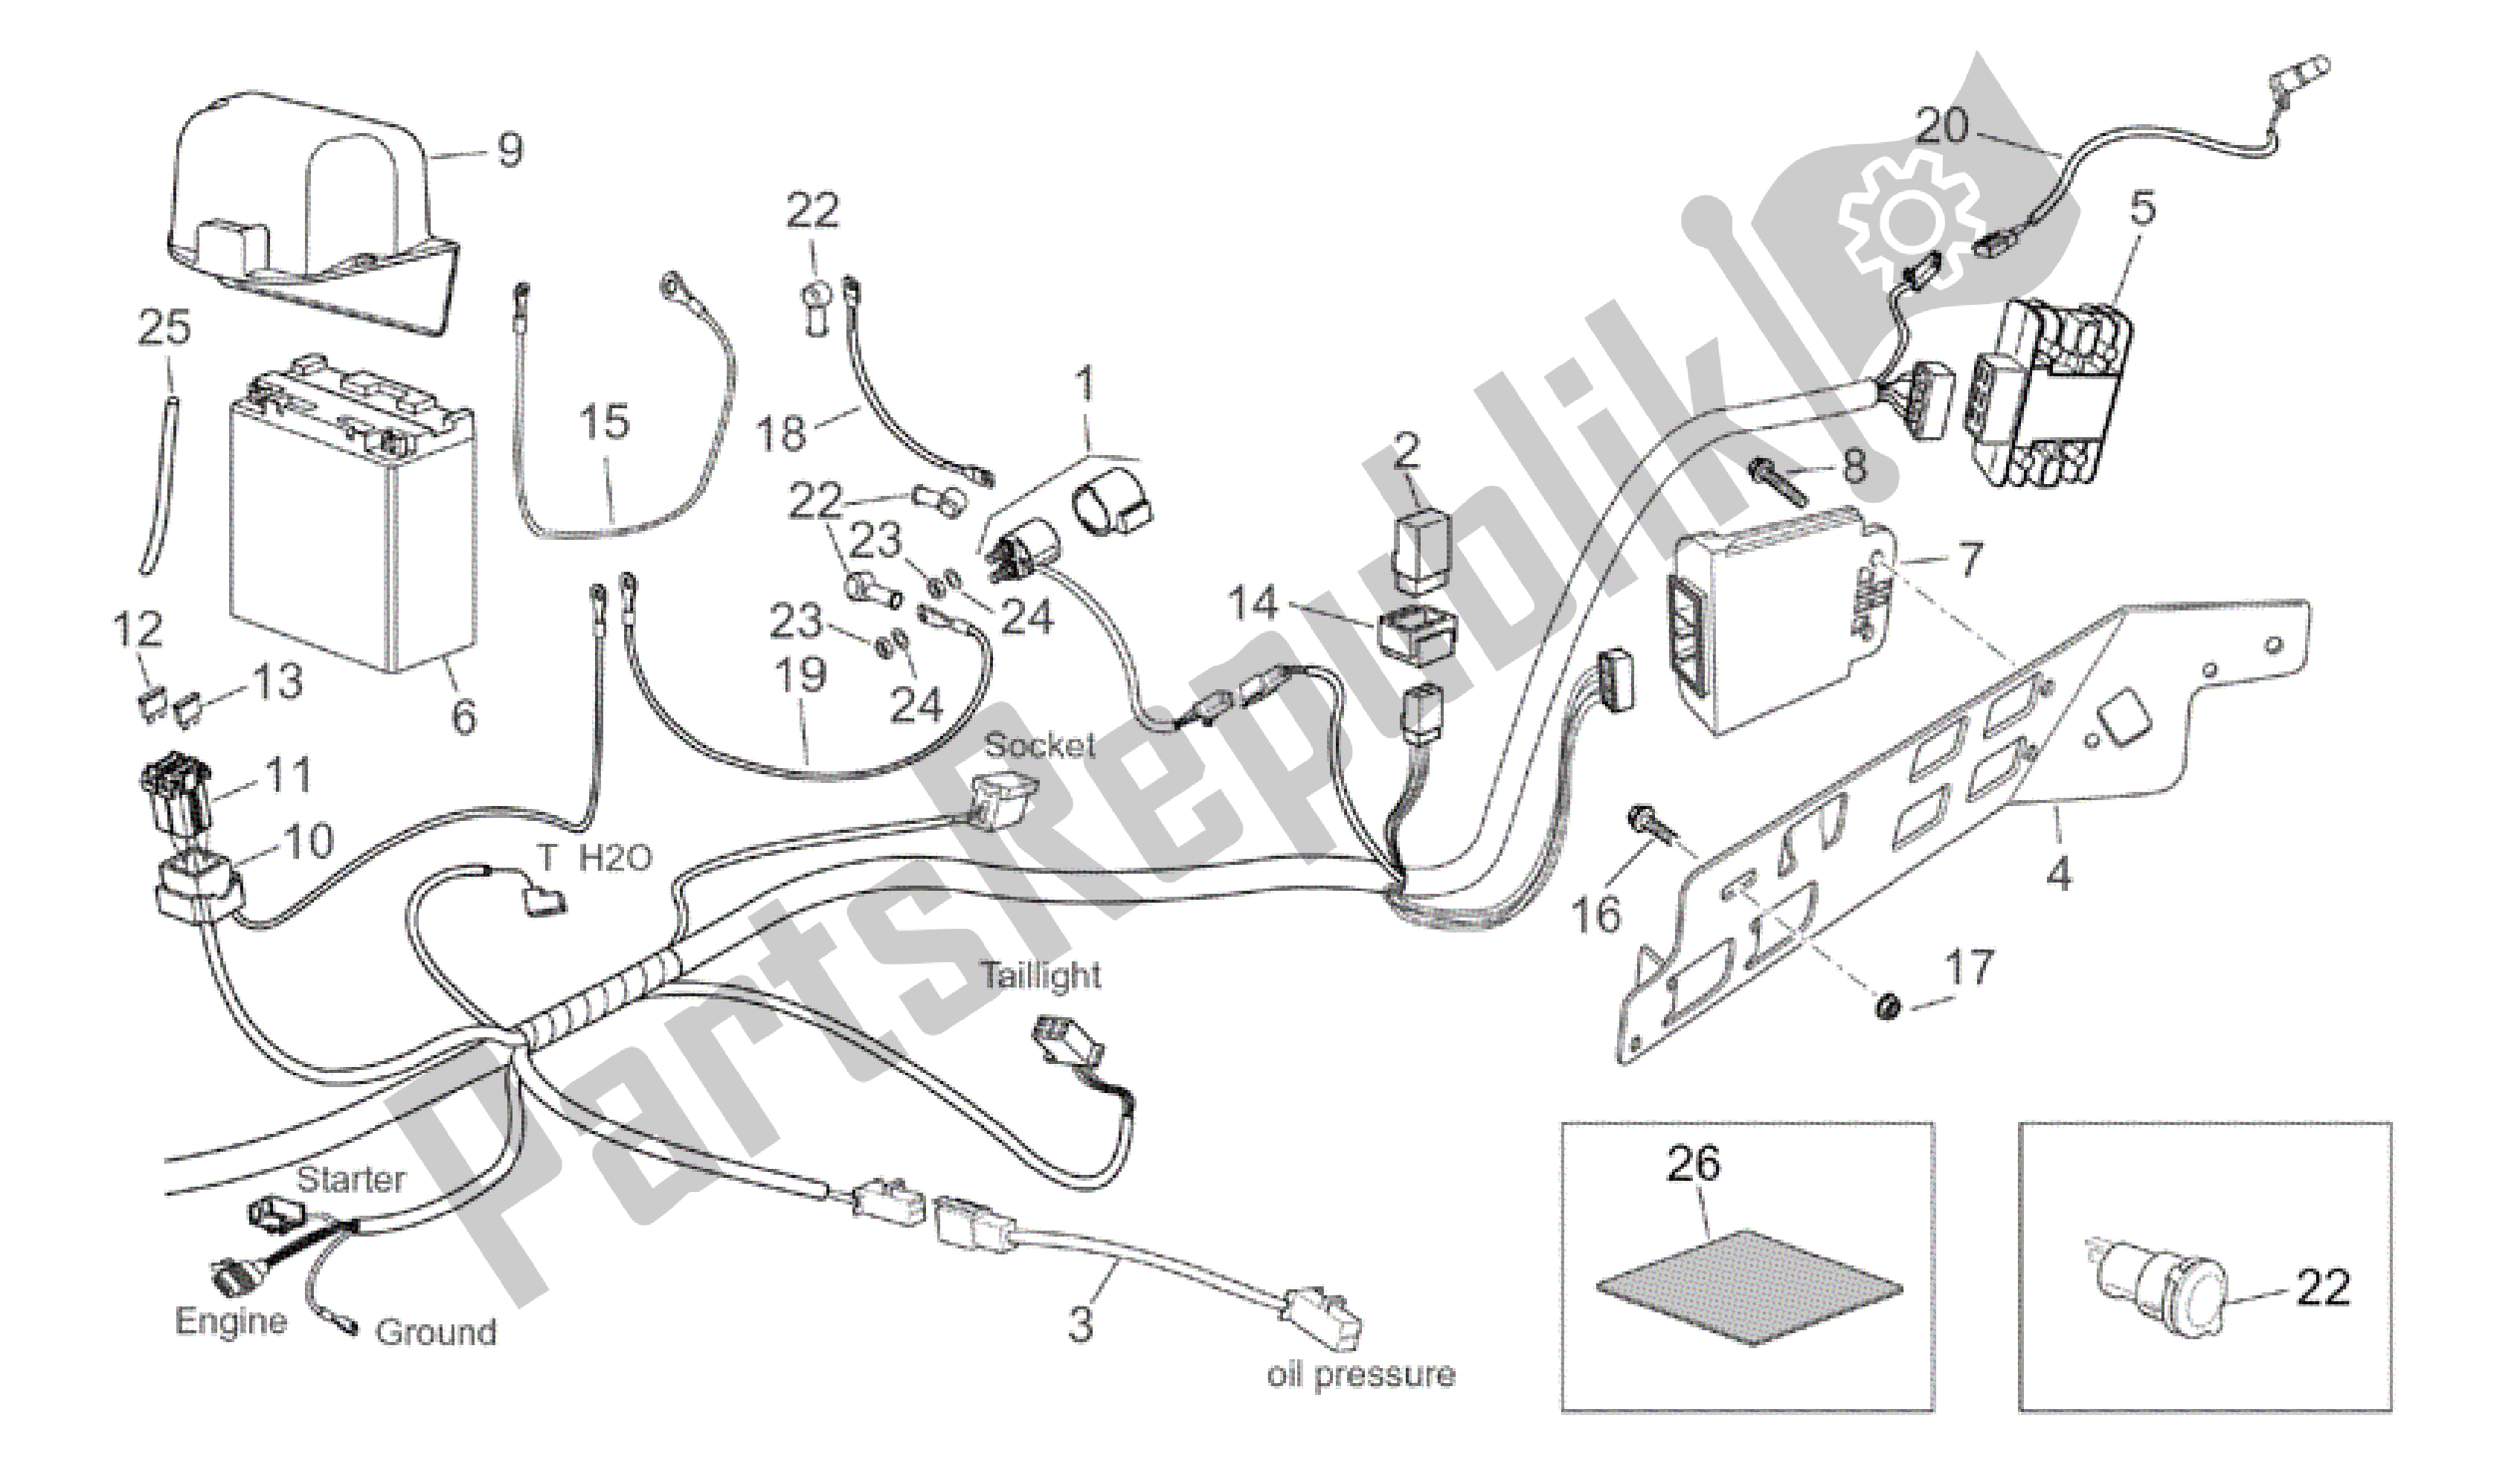 All parts for the Rear Electrical System of the Aprilia Atlantic 125 2003 - 2006